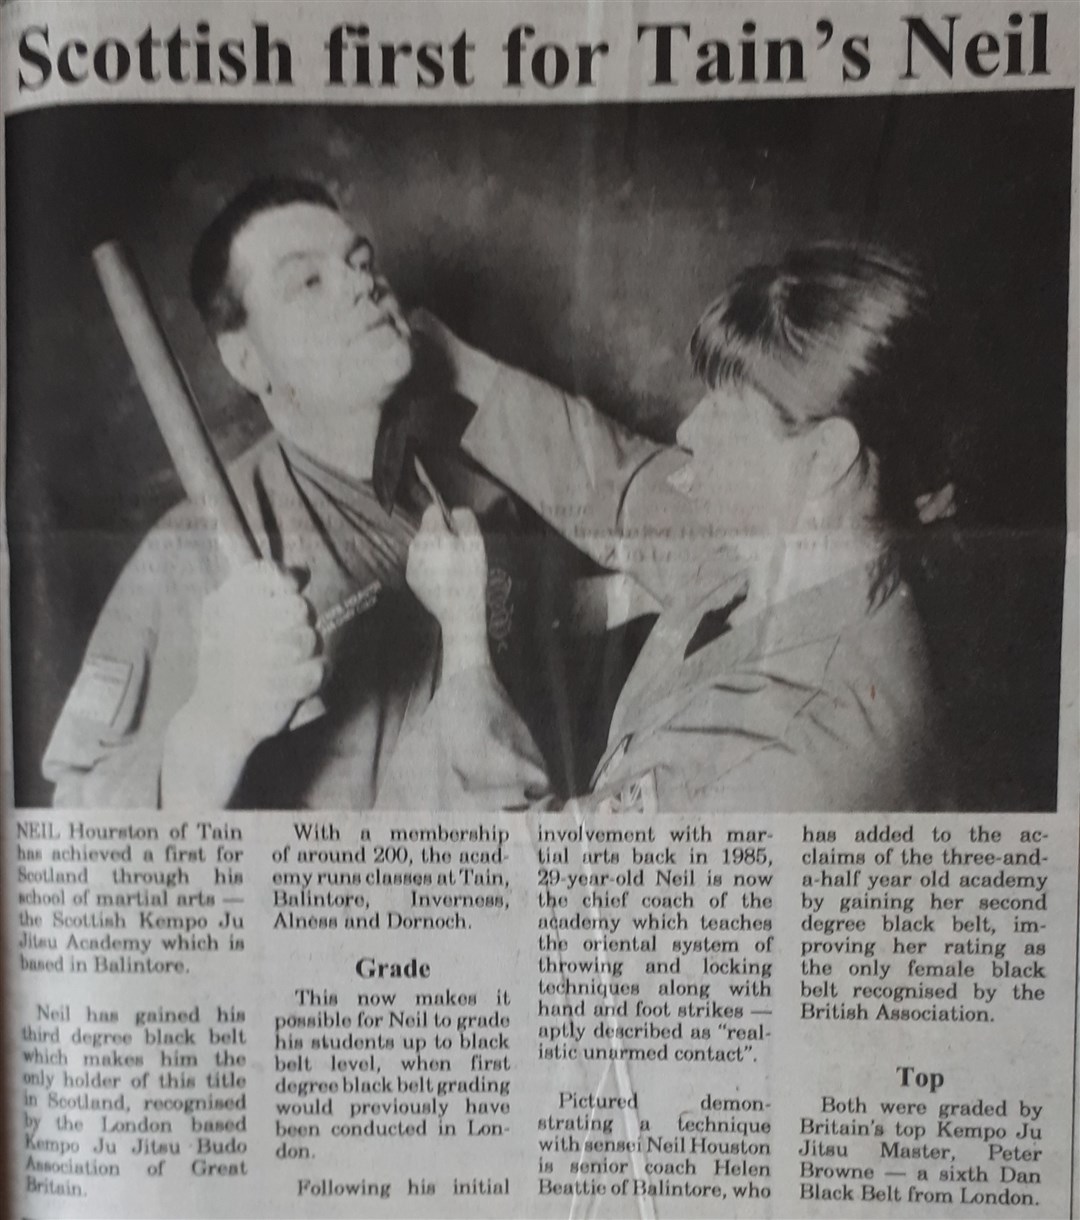 How the Ross-shire Journal reported local black belt achievements 25 years ago.